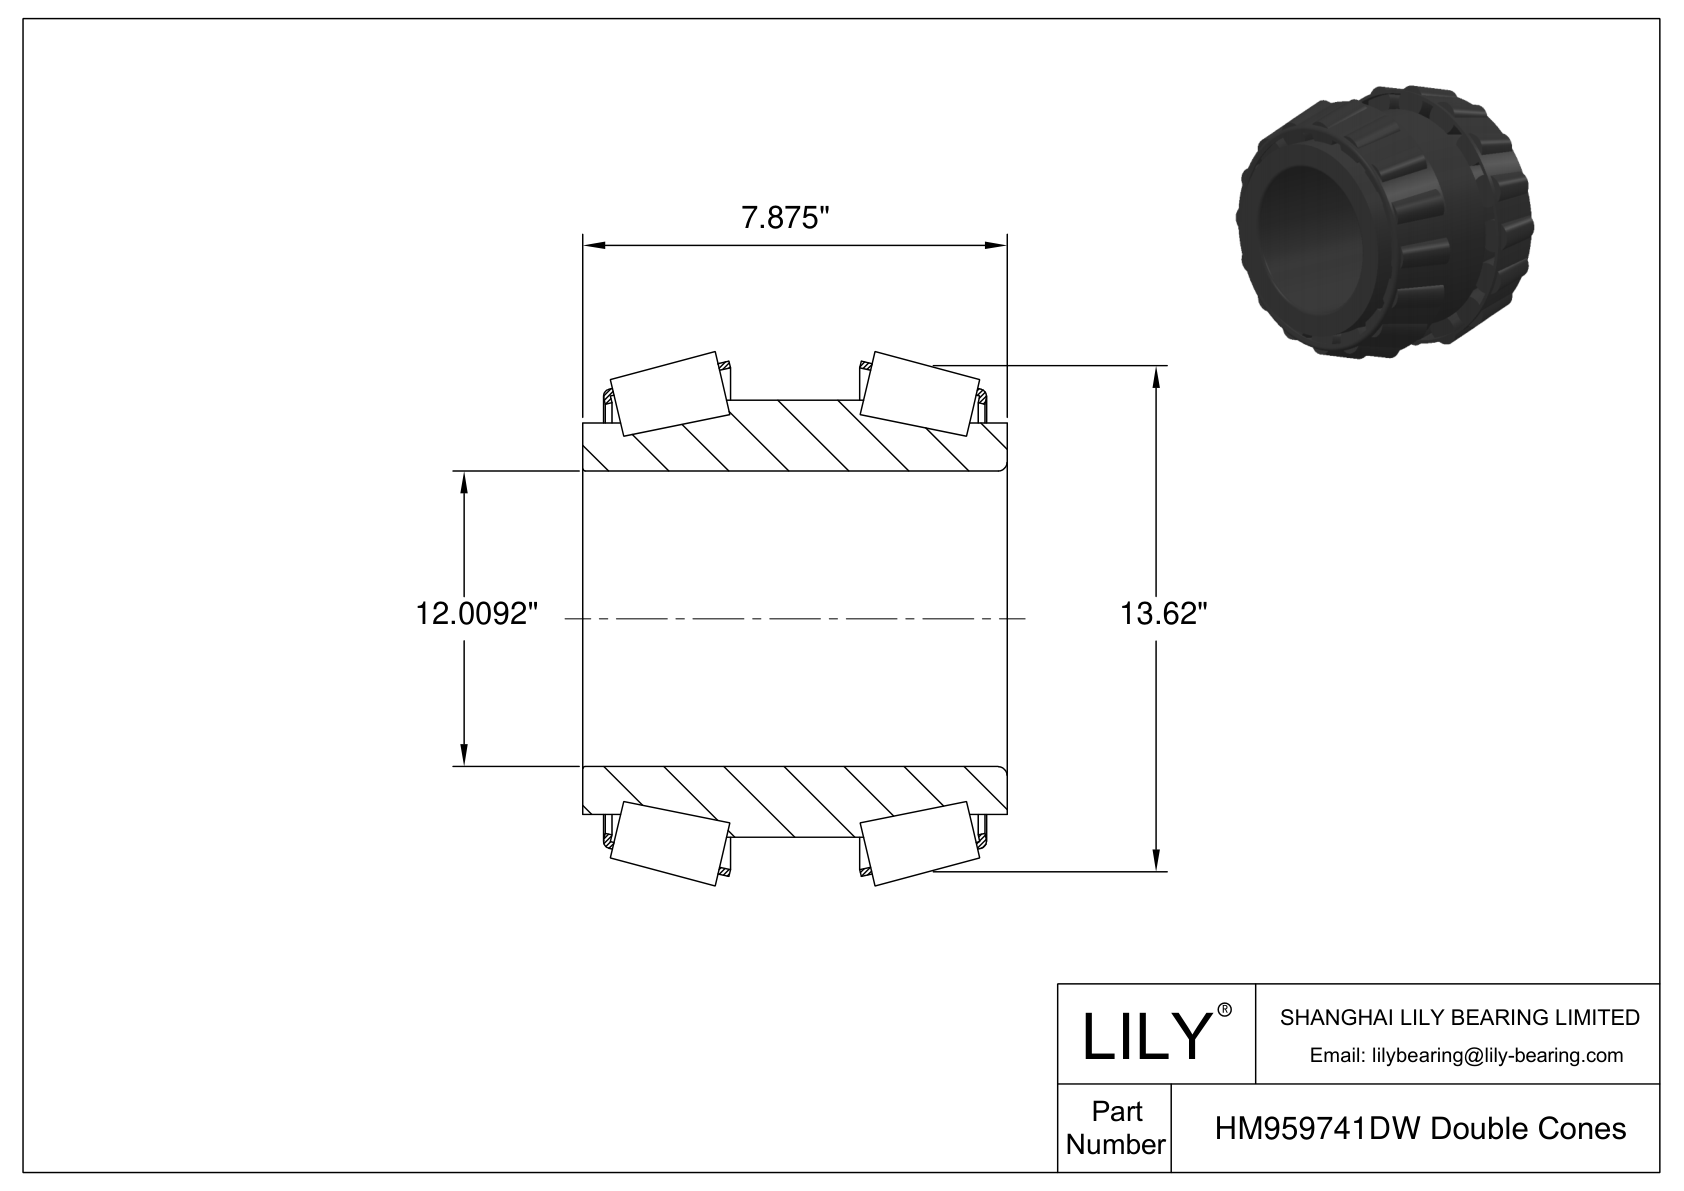 HM959741DW Double Cones (Imperial) cad drawing